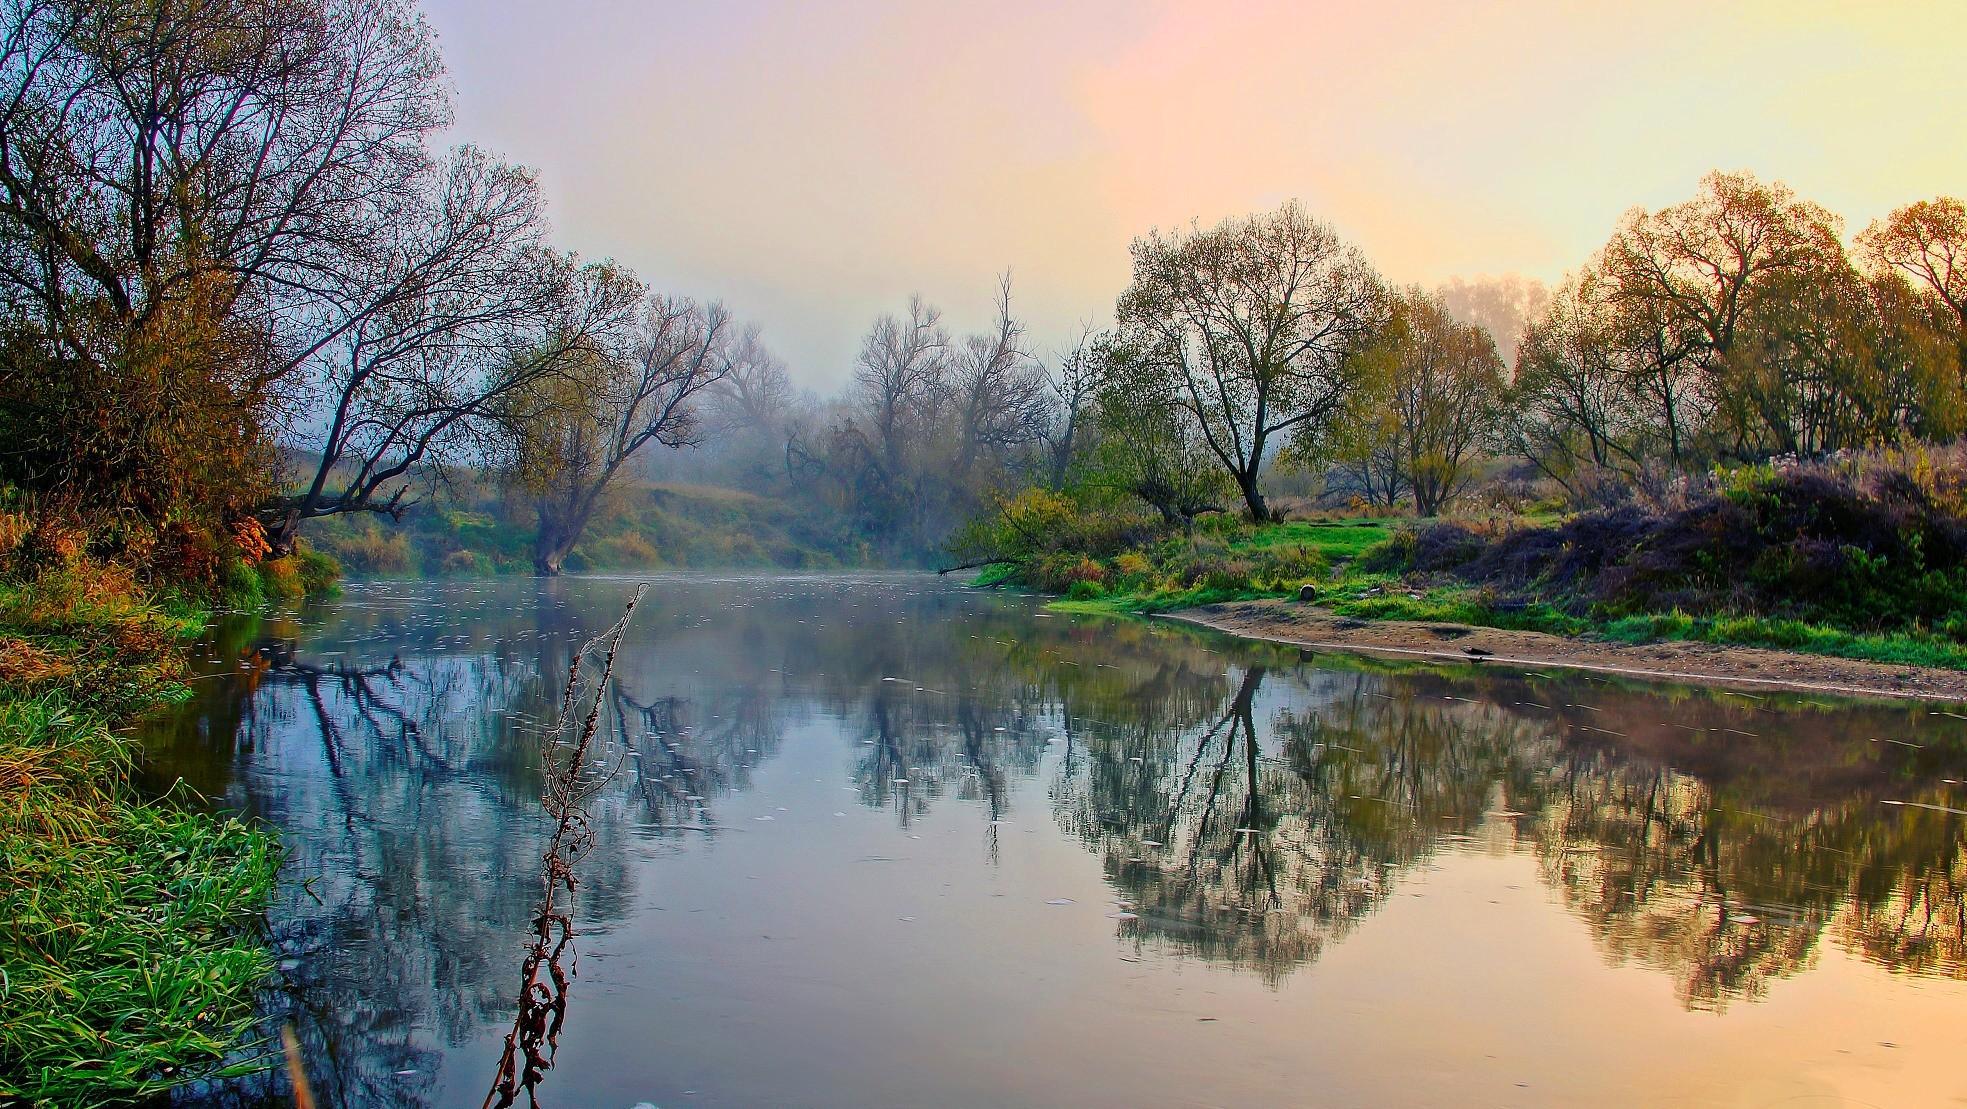 Autumn morning in the river wallpaper. PC